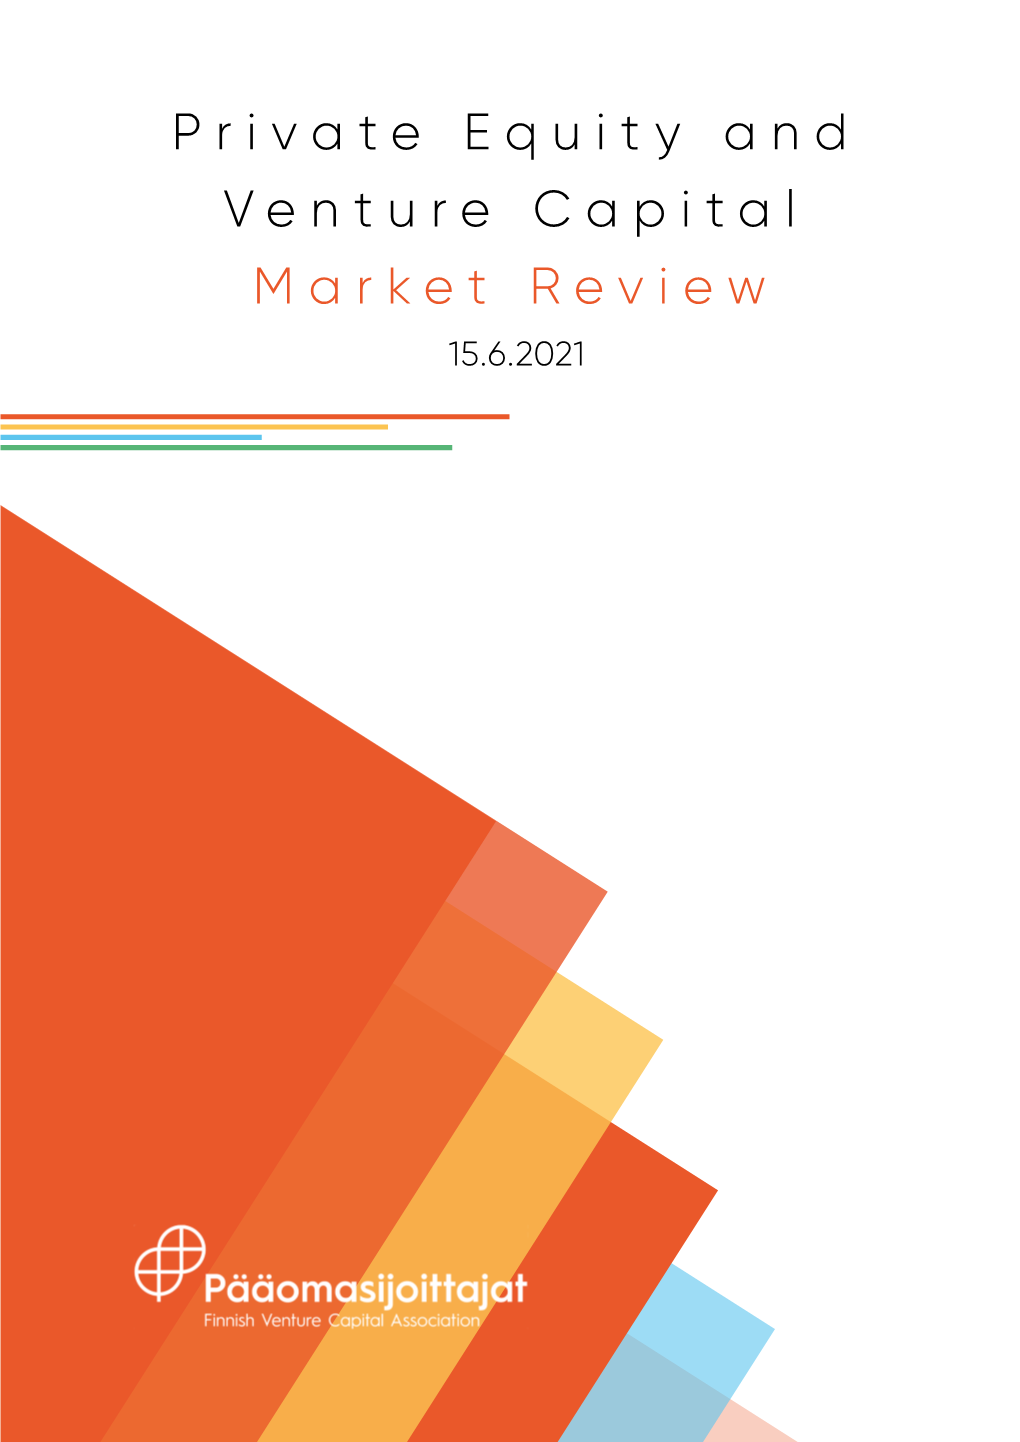 Private Equity & Venture Capital Market Review 2021